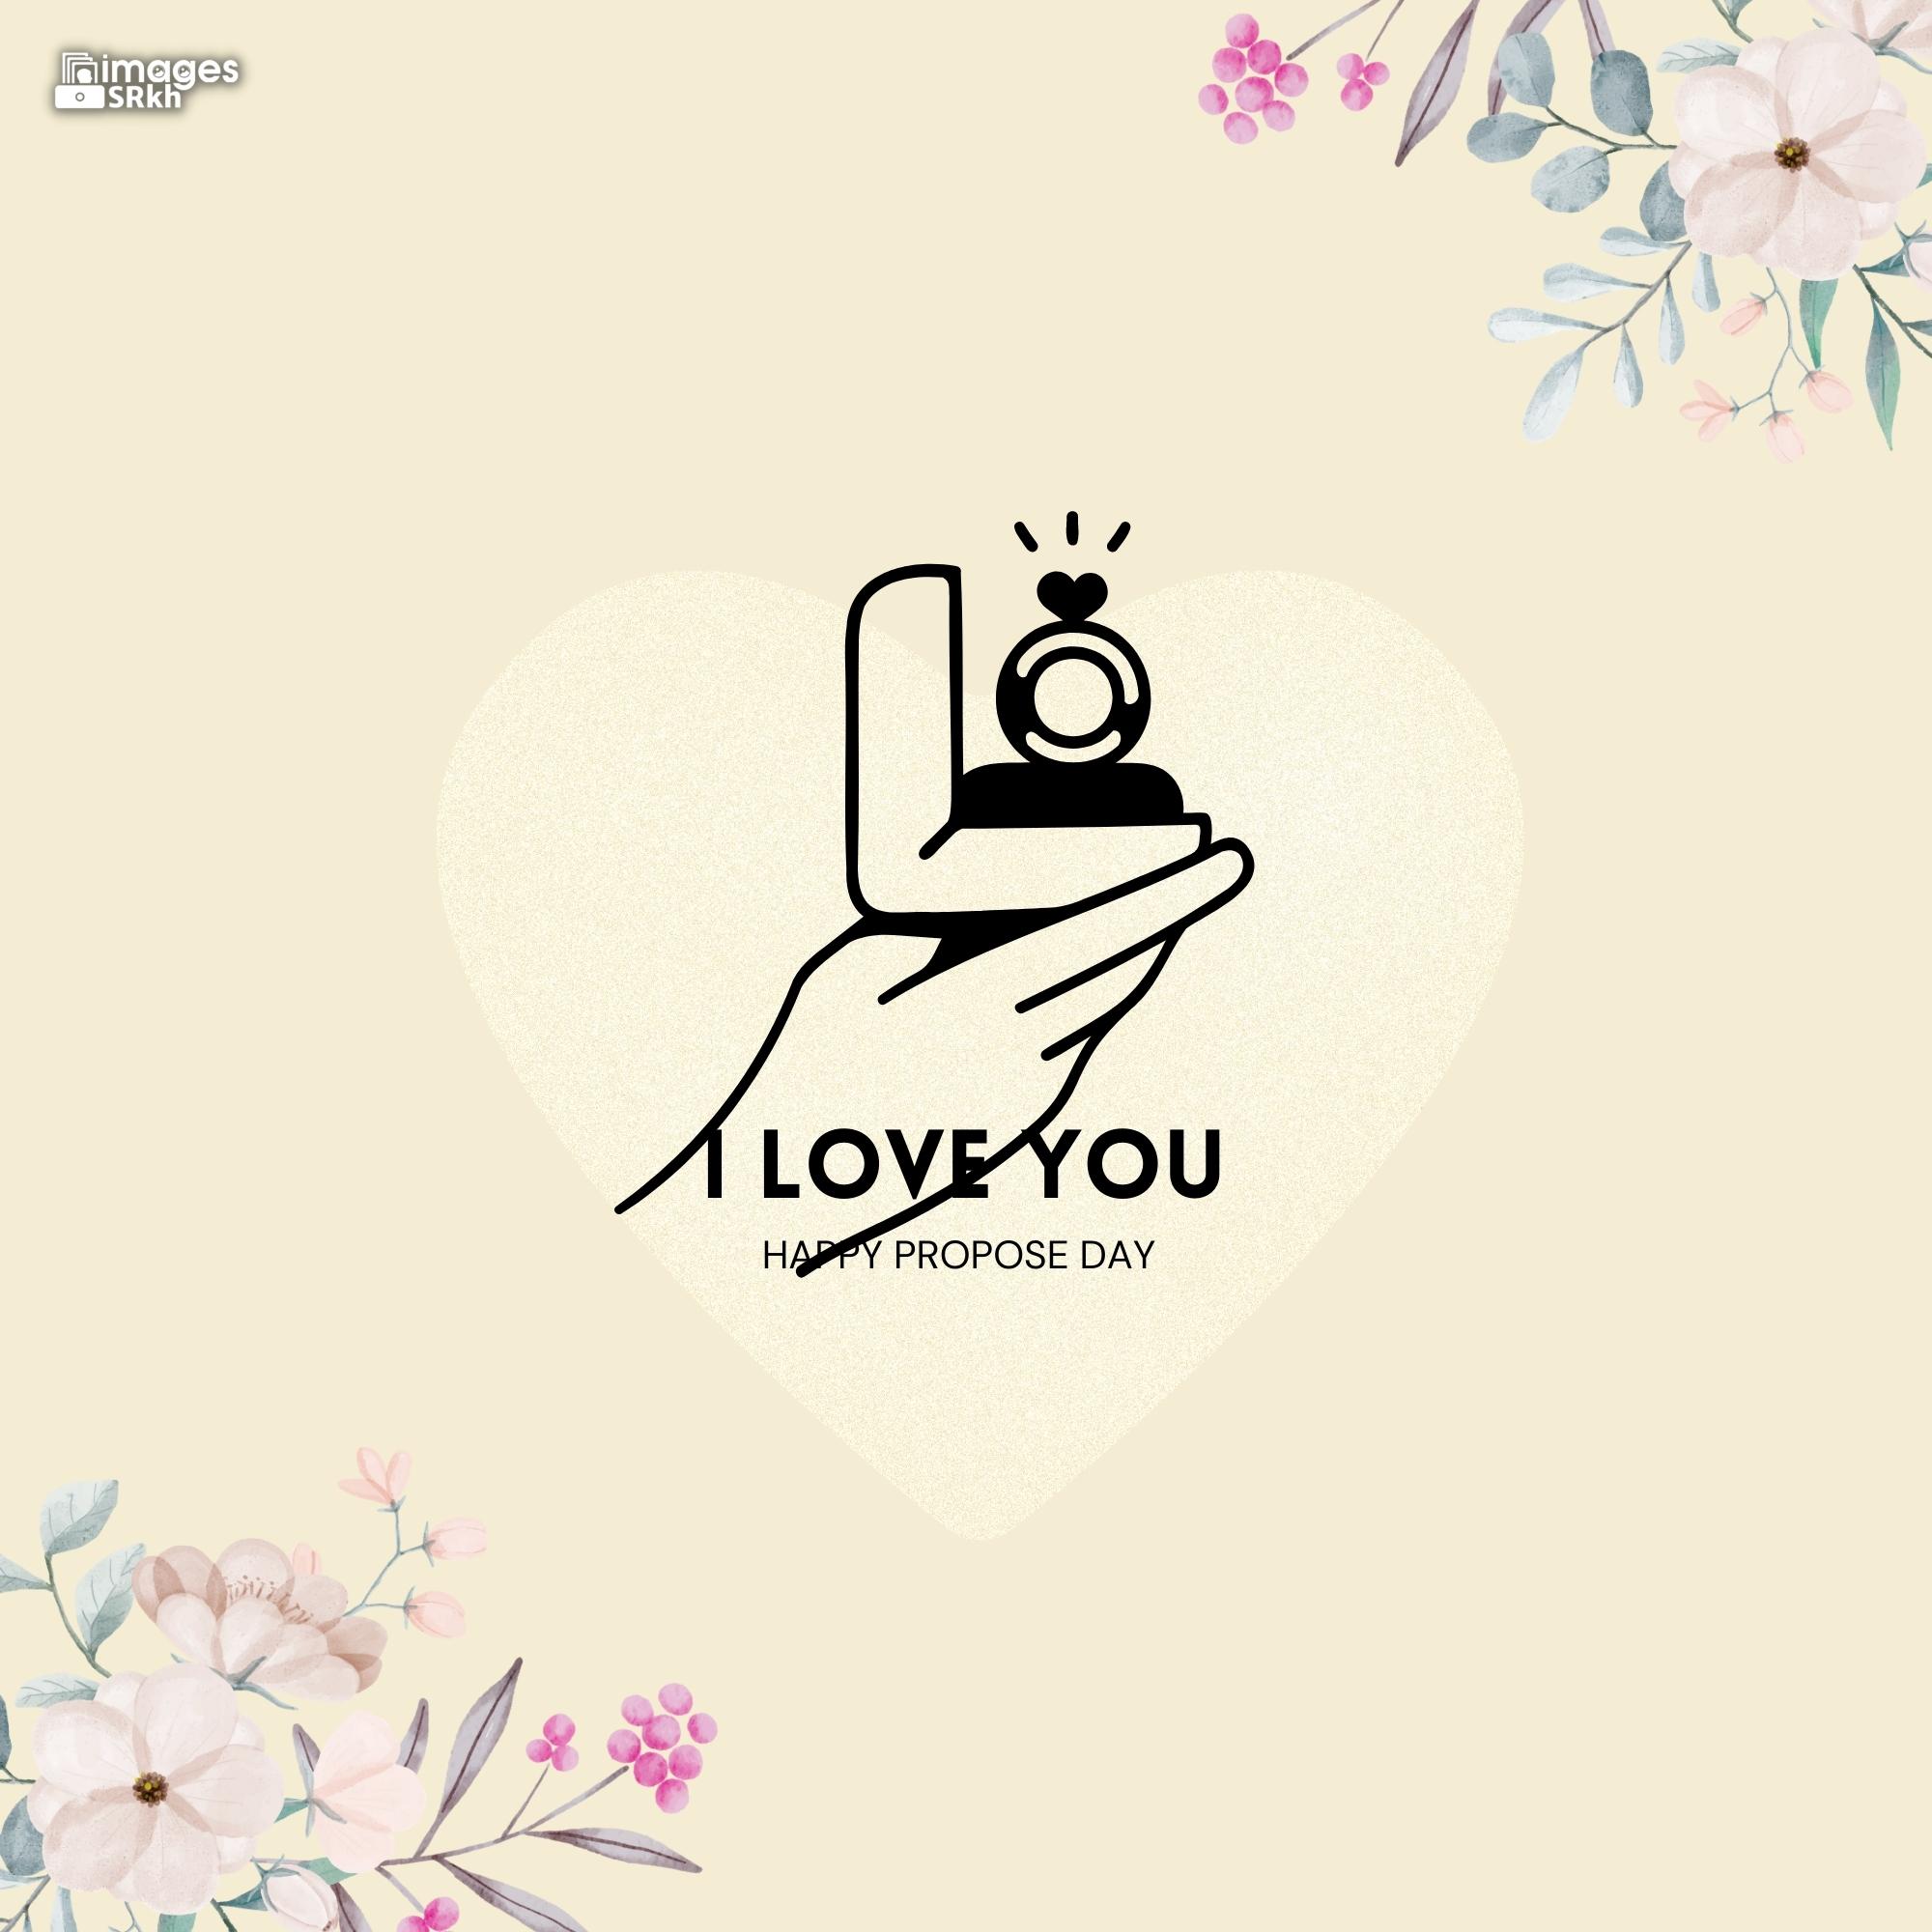 Happy Propose Day Images | 384 | I LOVE YOU